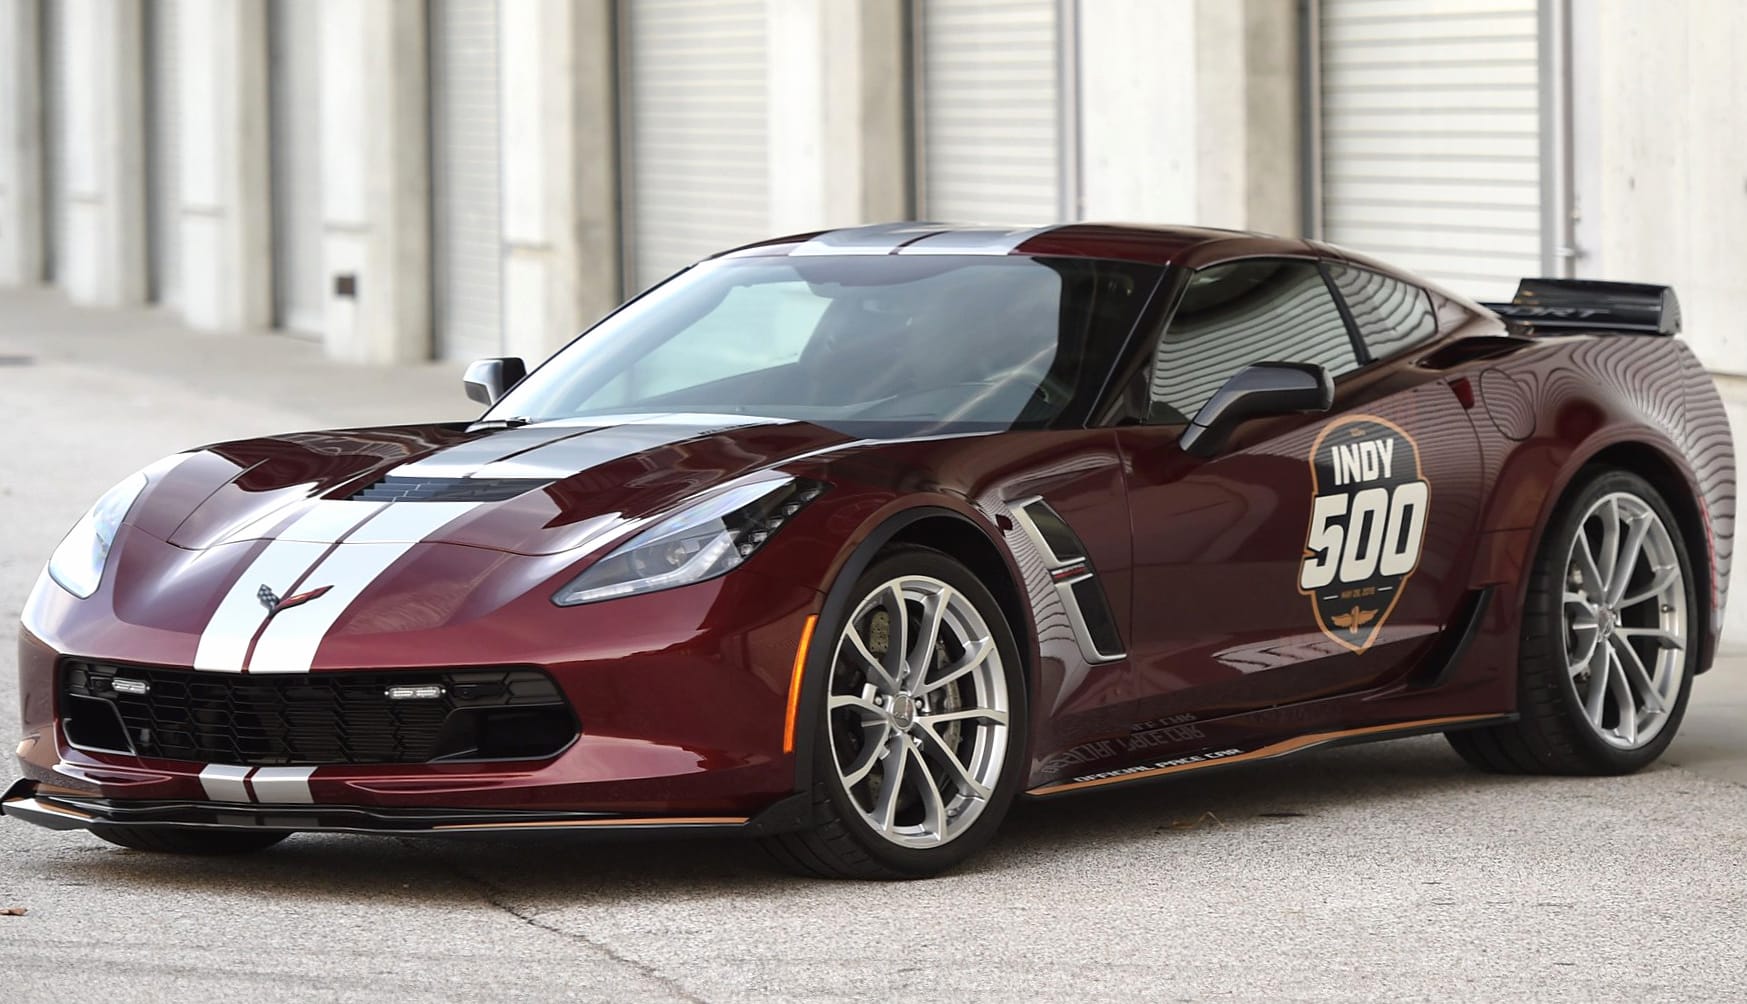 Chevrolet Corvette Grand Sport Indy 500 Pace Car wallpapers HD quality